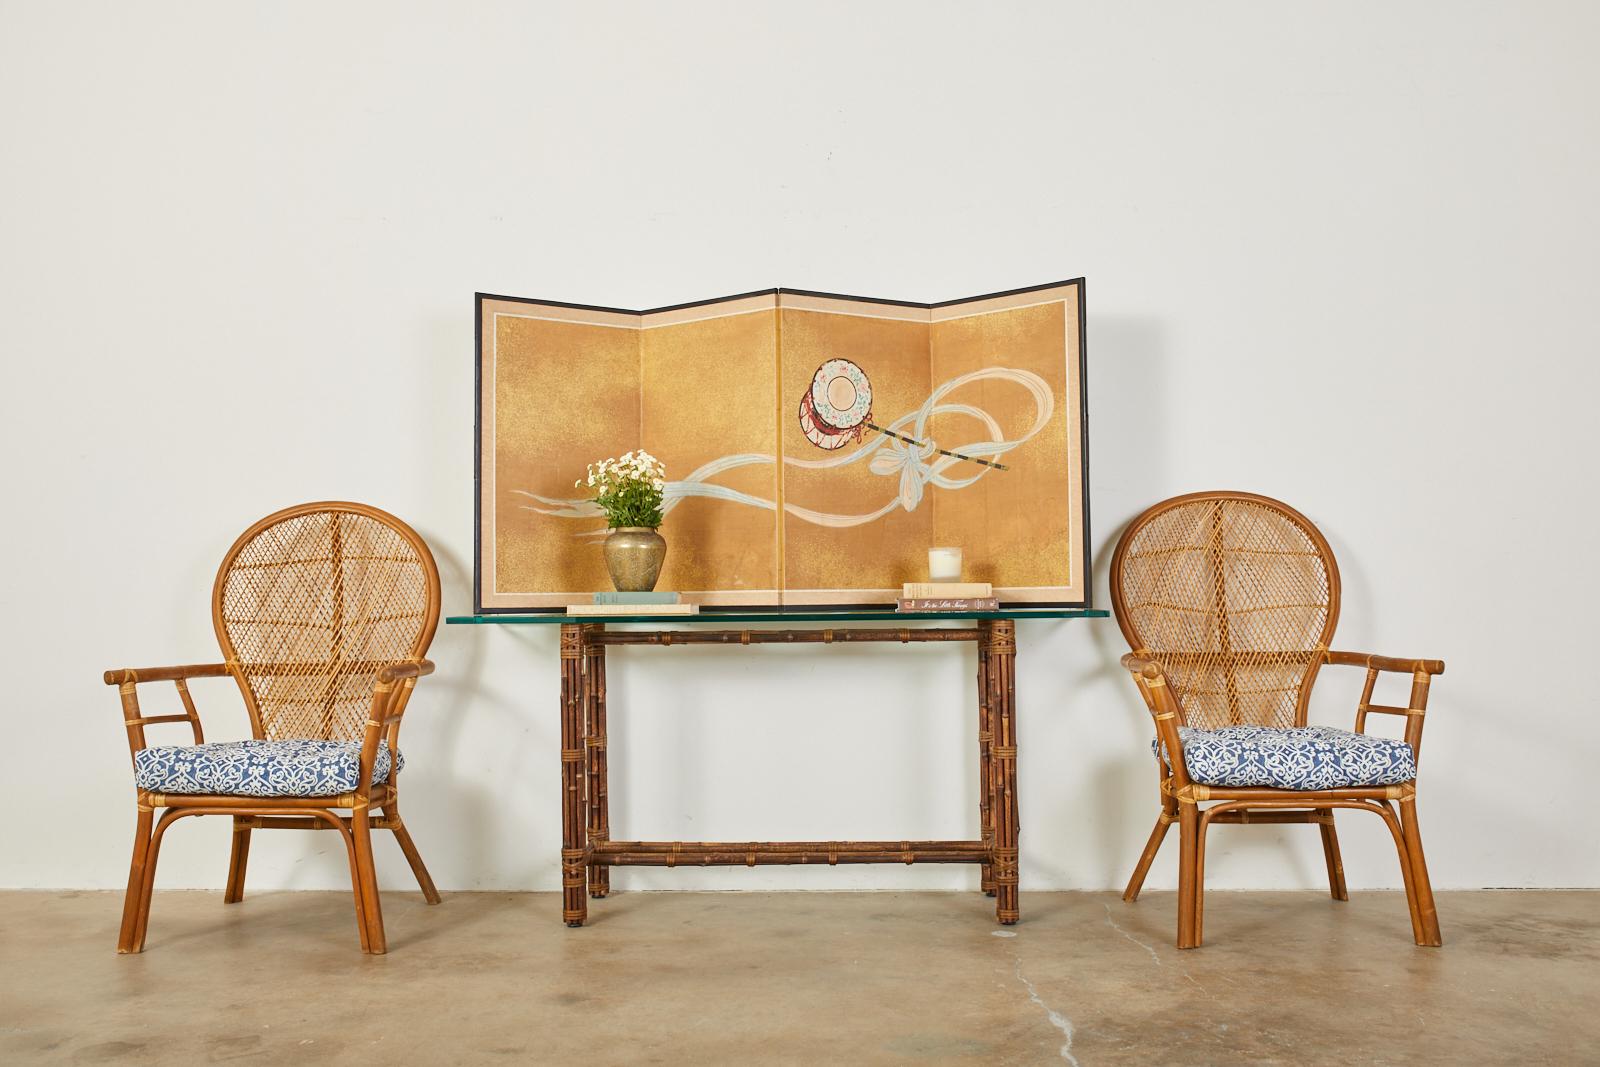 Stylish organic modern console table or sofa table made by McGuire. The console features an iron frame painted golden gate orange for authenticity. The frame is encased in bamboo reeds and lashed together with an abundance of leather rawhide laces.